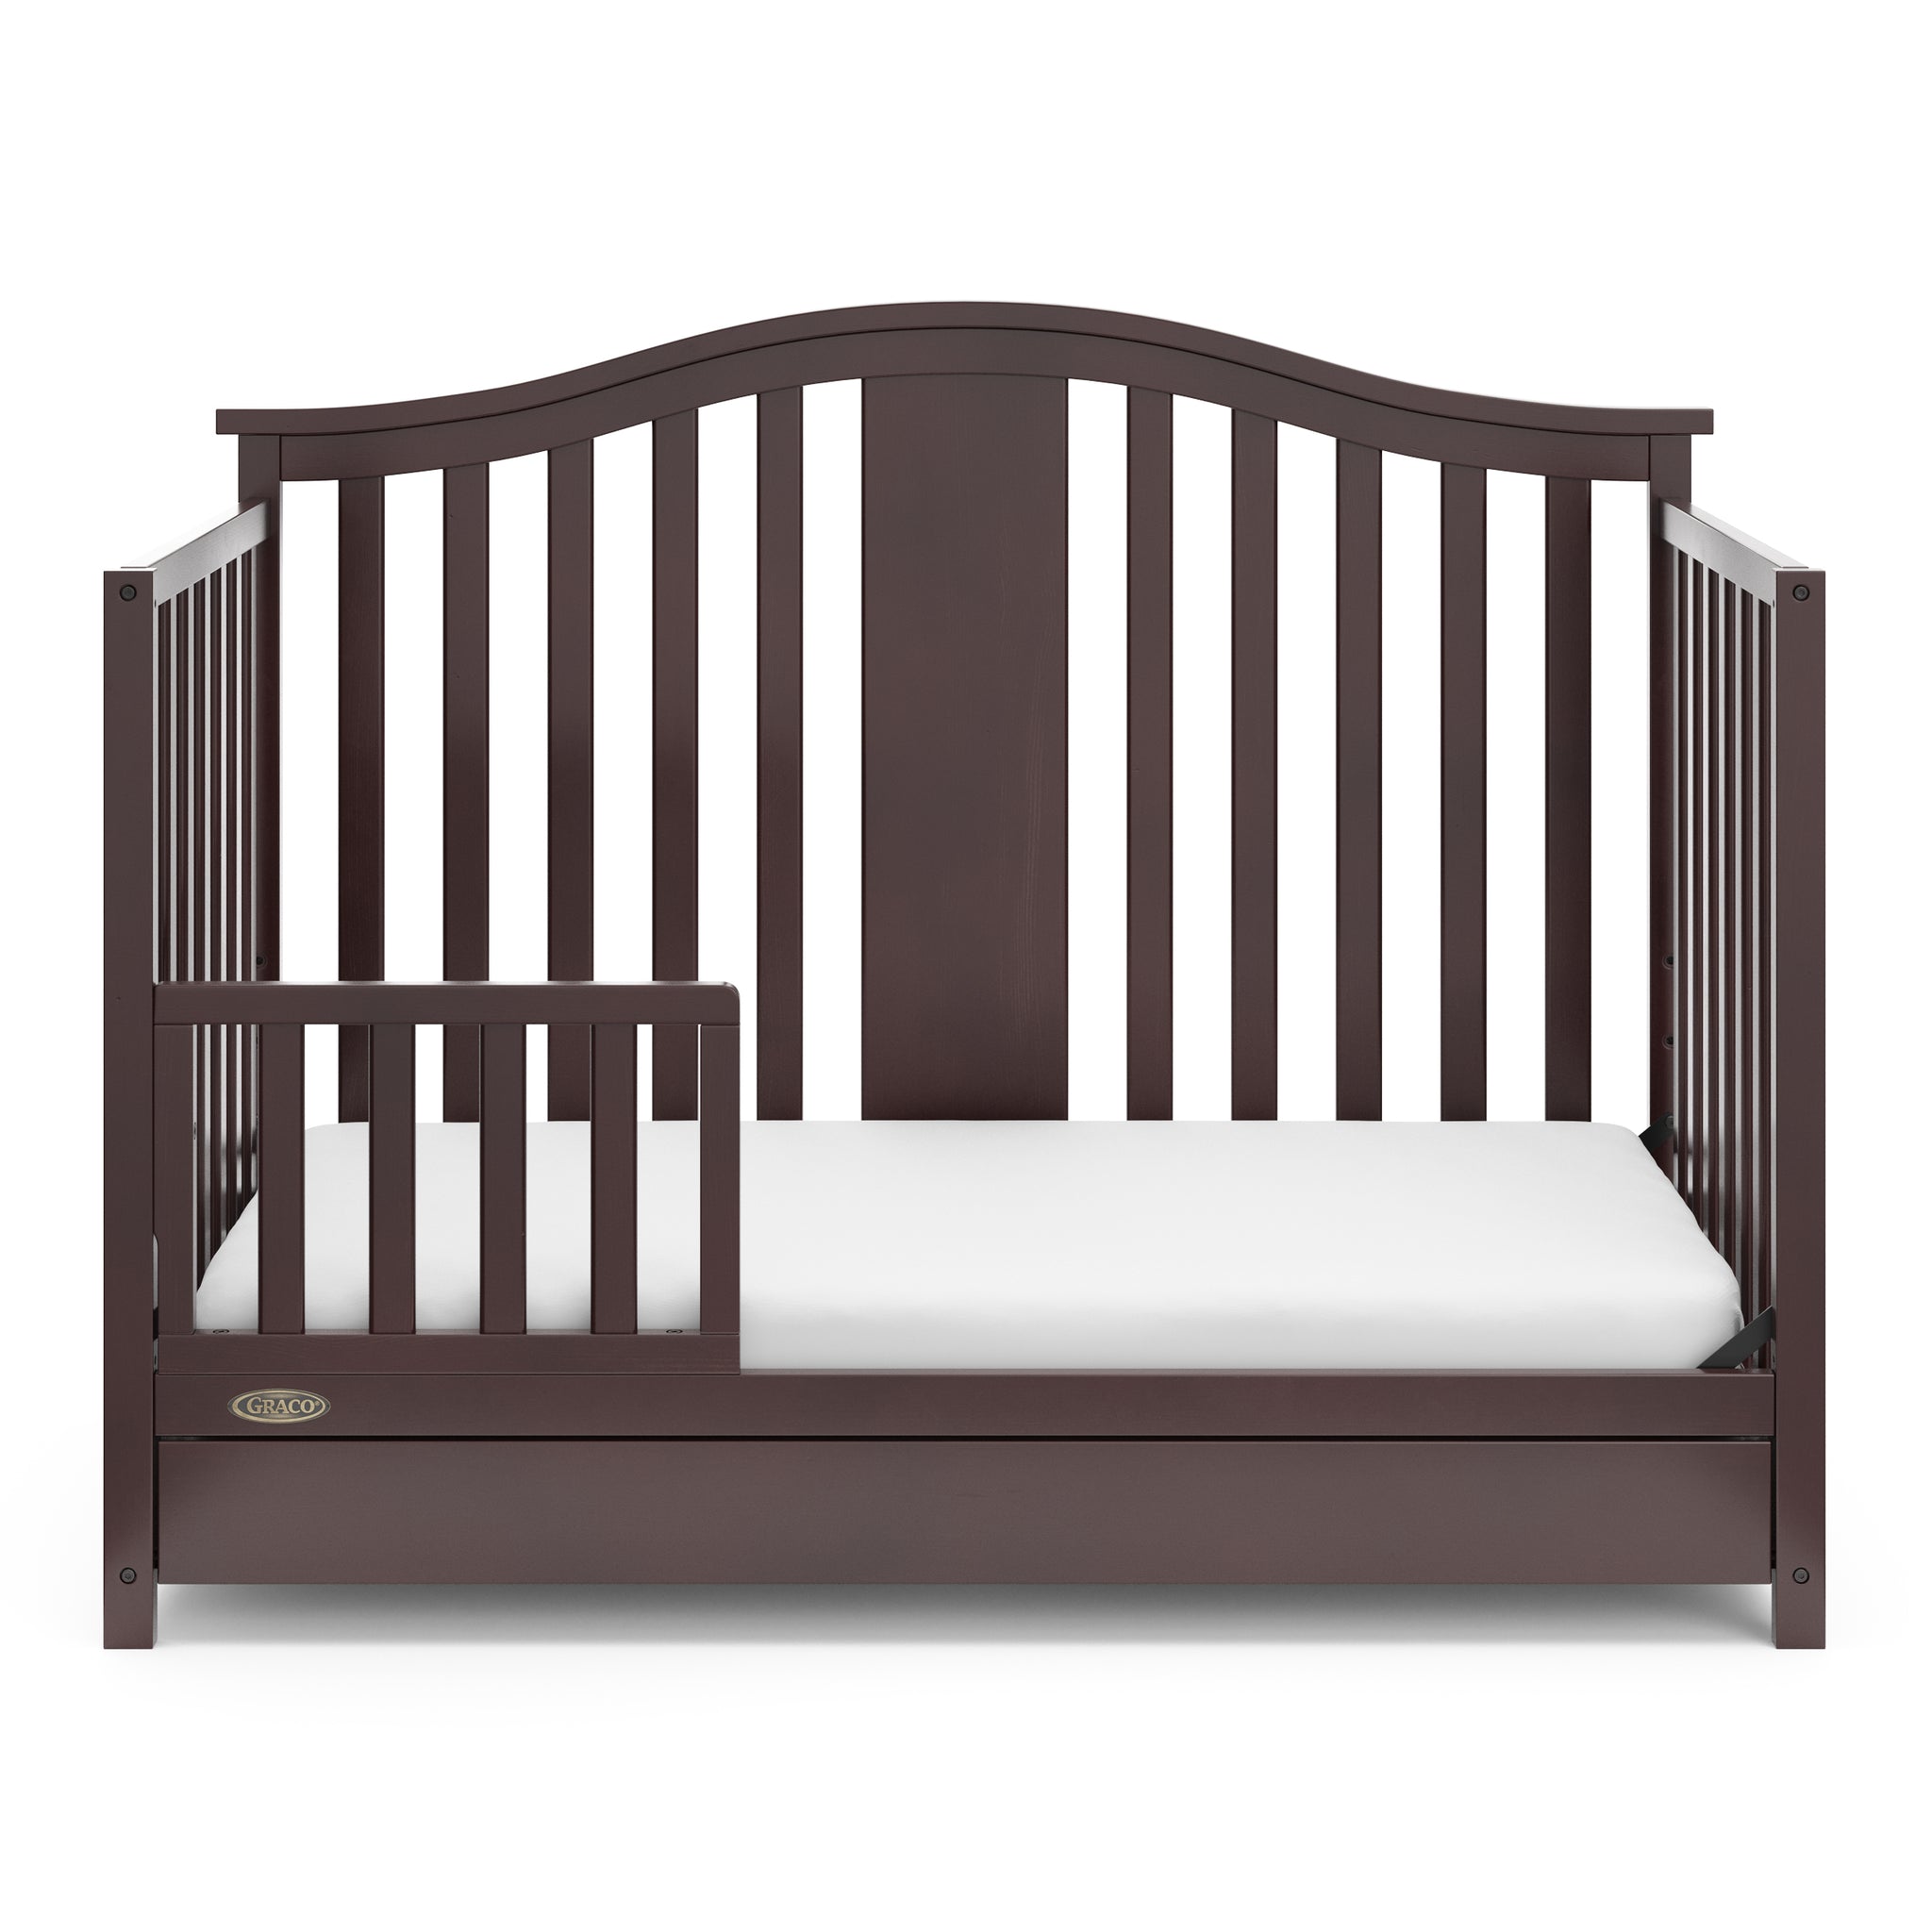 espresso crib with drawer in toddler bed conversion with one safety guardrail